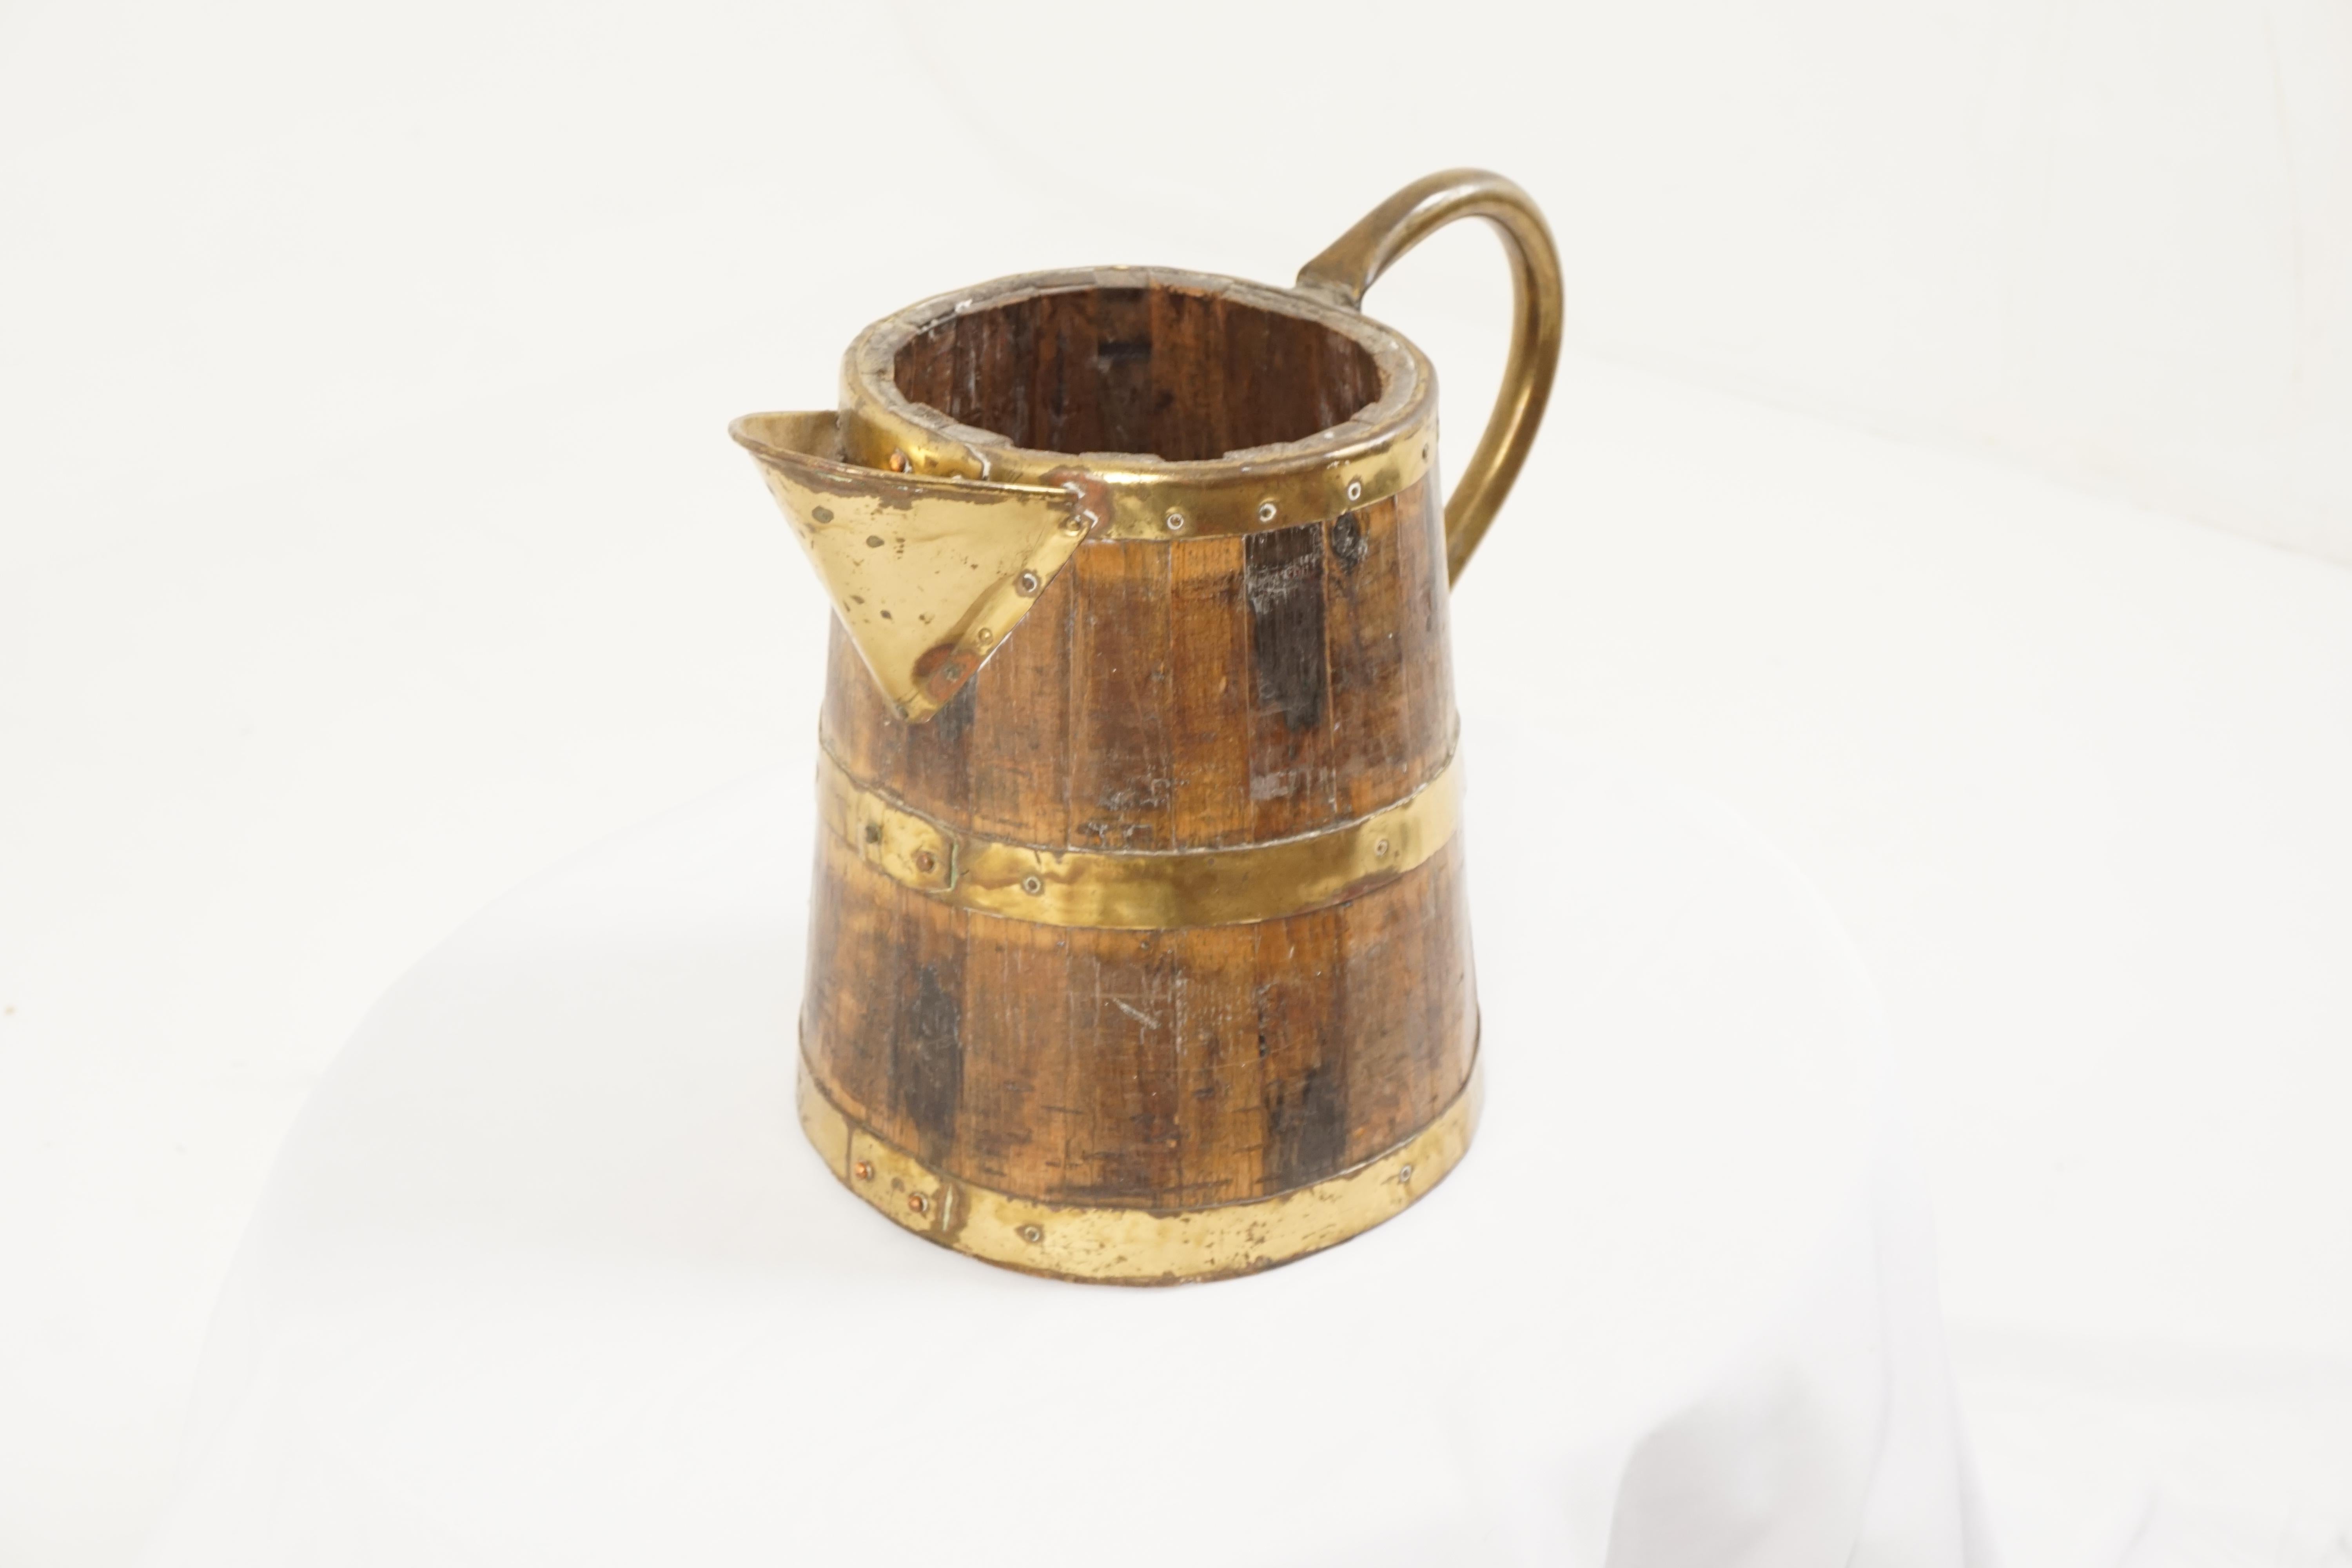 Antique oak and brass bound jug, Scotland 1910

Scotland 1910
Solid oak and brass
Coppered construction
Shaped handle on one end large brass spout on the front
Three brass bands
Nice decorative piece for the bar or in your